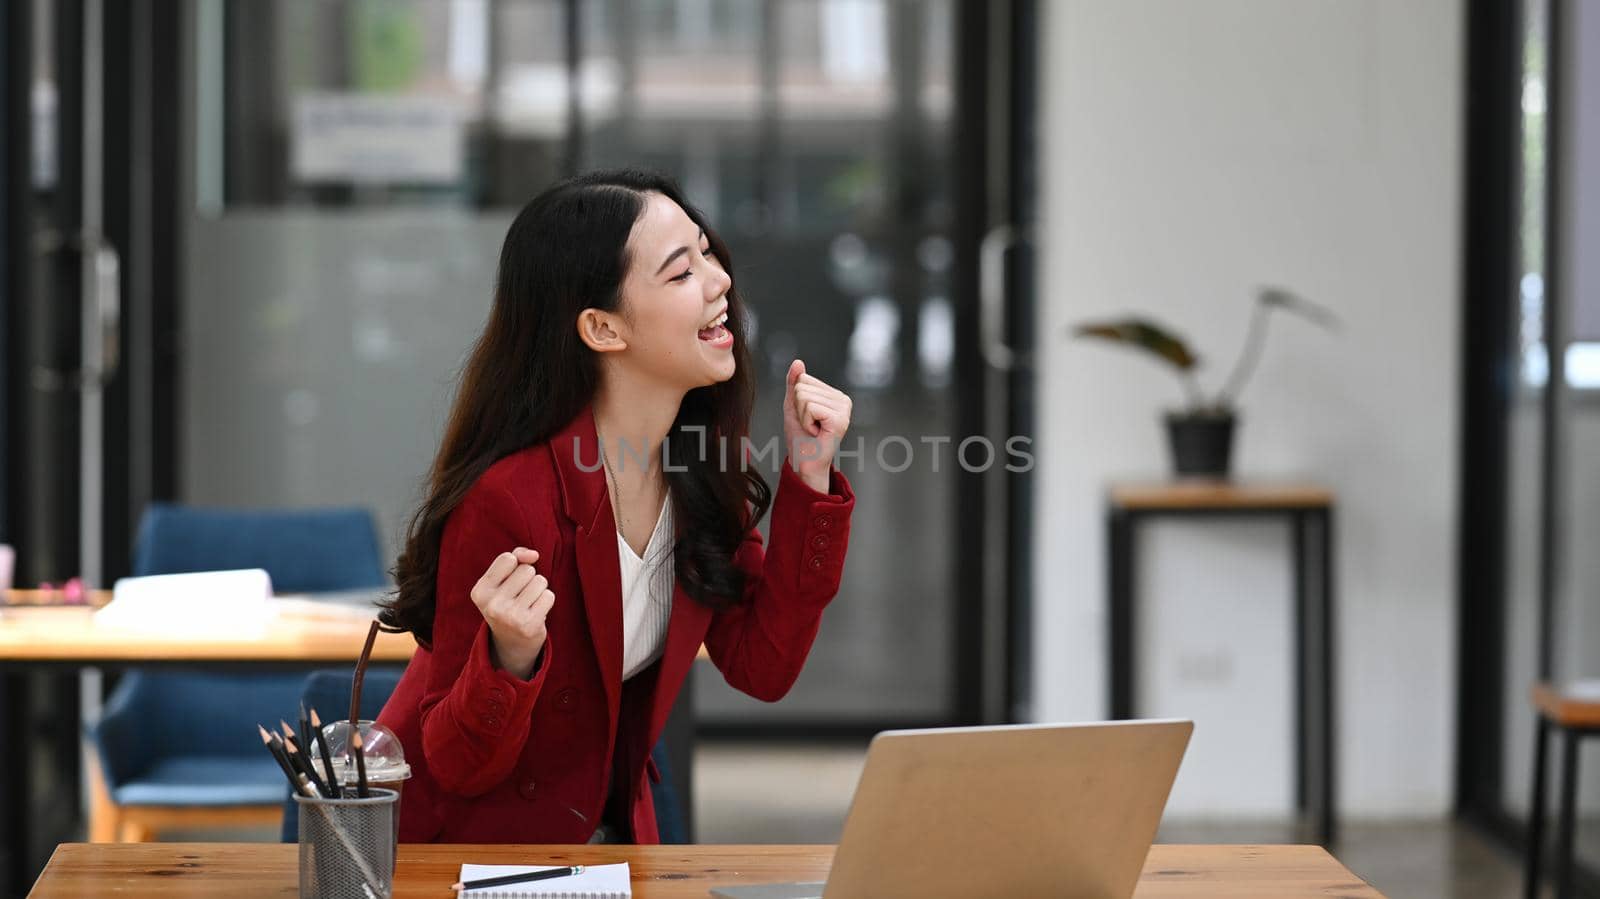 Excited businesswoman standing at her workplace and celebrating important achievement.